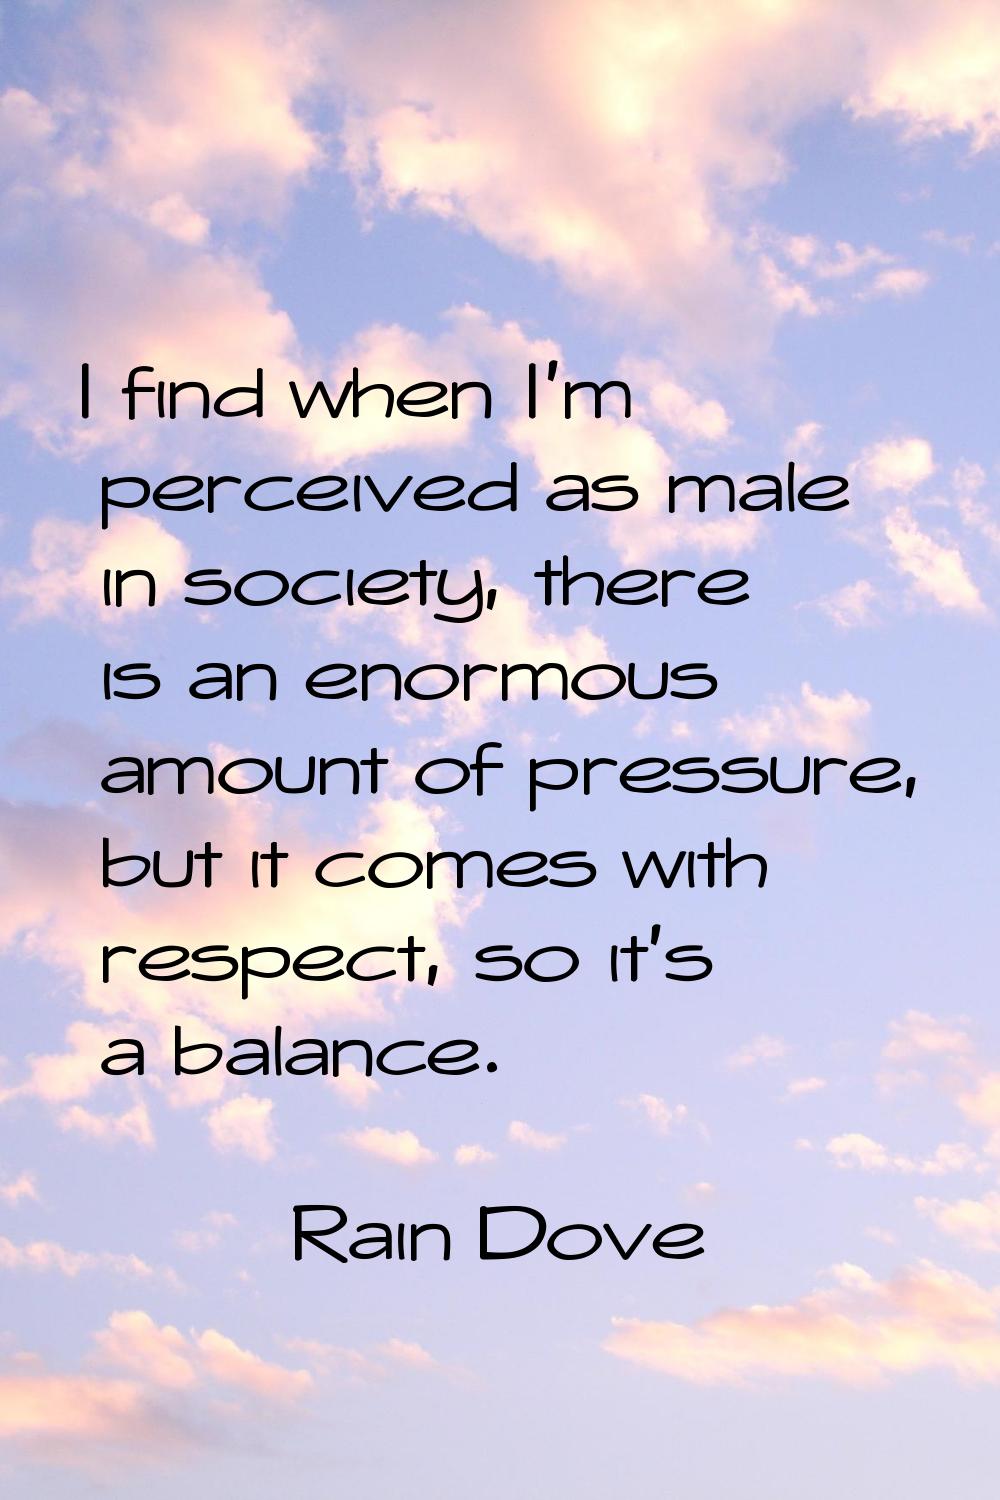 I find when I'm perceived as male in society, there is an enormous amount of pressure, but it comes